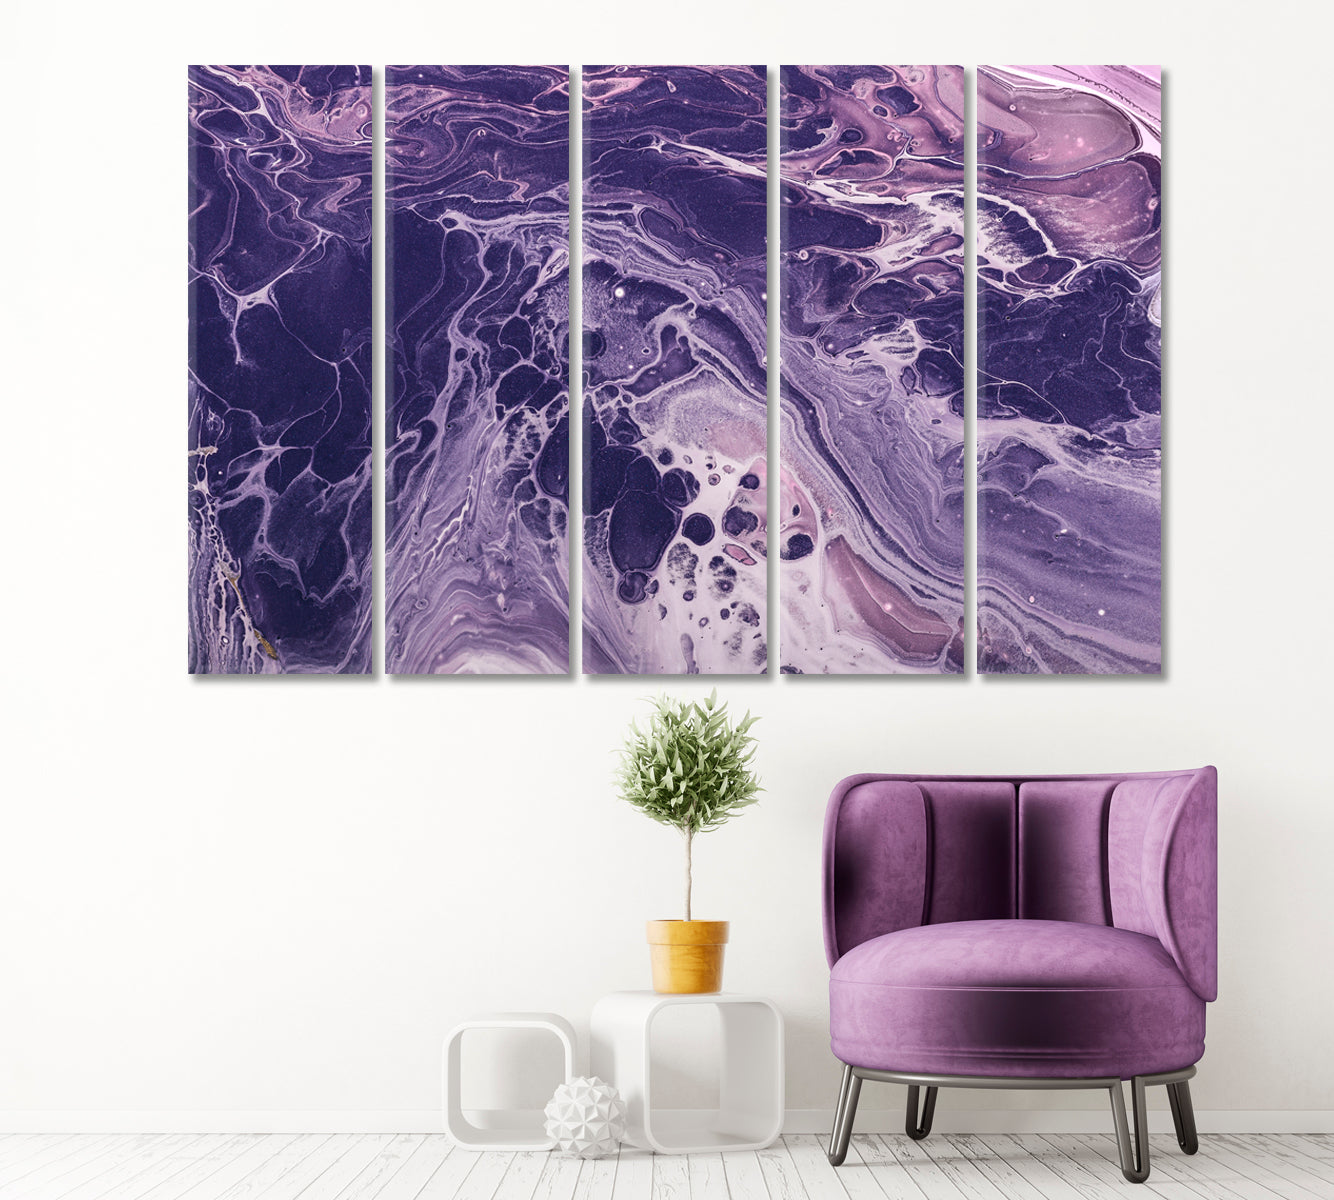 Monochrome Violet Waves and Bubbles Canvas Print ArtLexy 5 Panels 36"x24" inches 